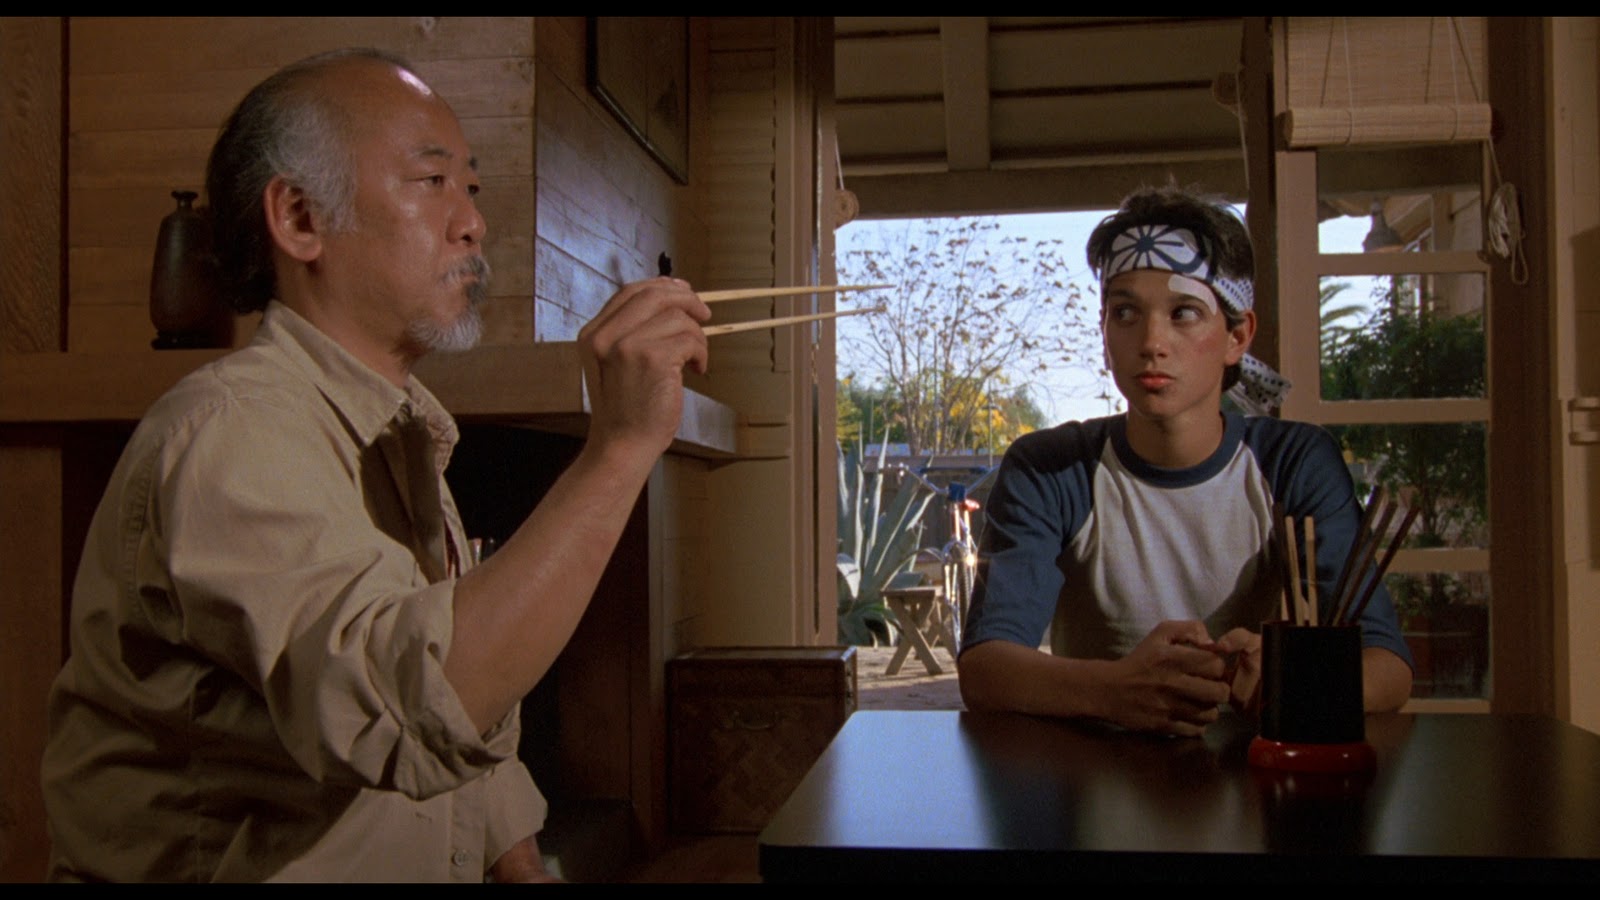 Movie Review: The Karate Kid (1984) | The Ace Black Movie Blog